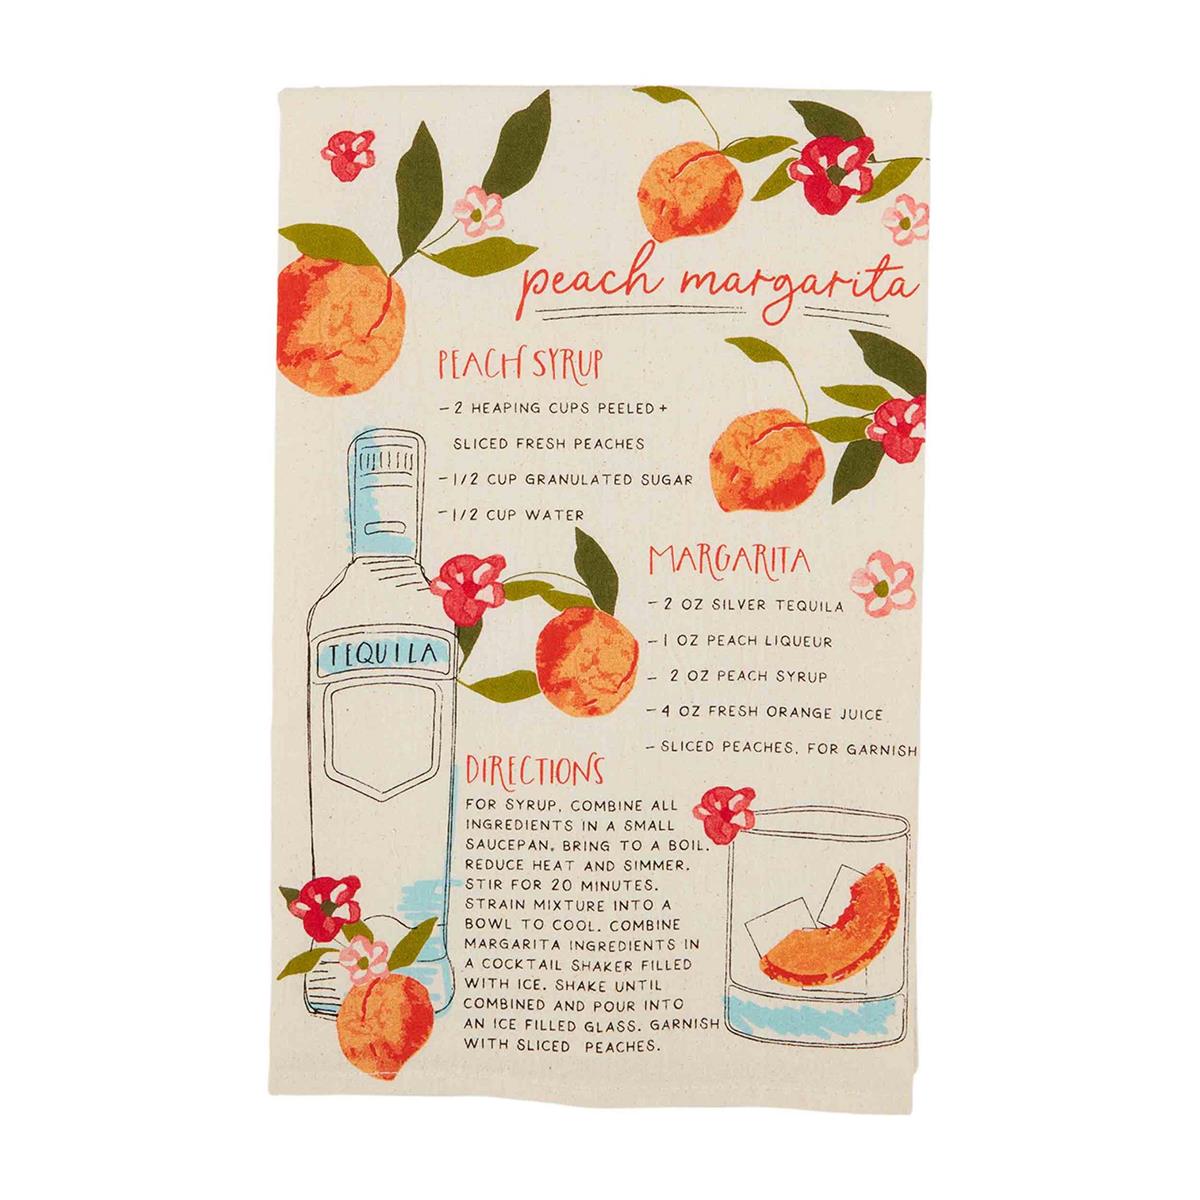 peach drink recipe towel with drawings of peaches, pink flowers, a glass with ice, bottle of tequila, and a recipe on a white background 